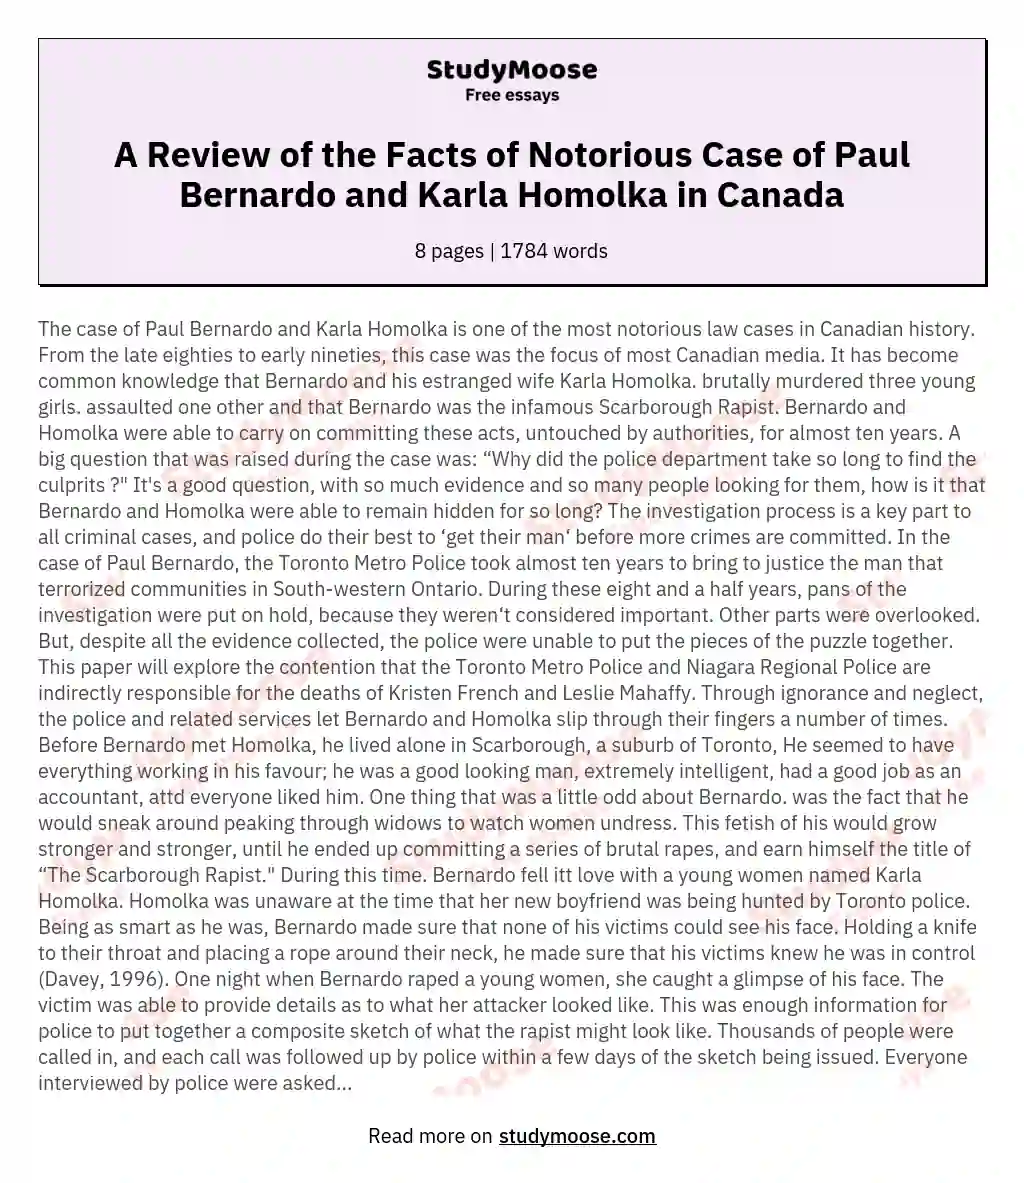 A Review of the Facts of Notorious Case of Paul Bernardo and Karla Homolka in Canada essay